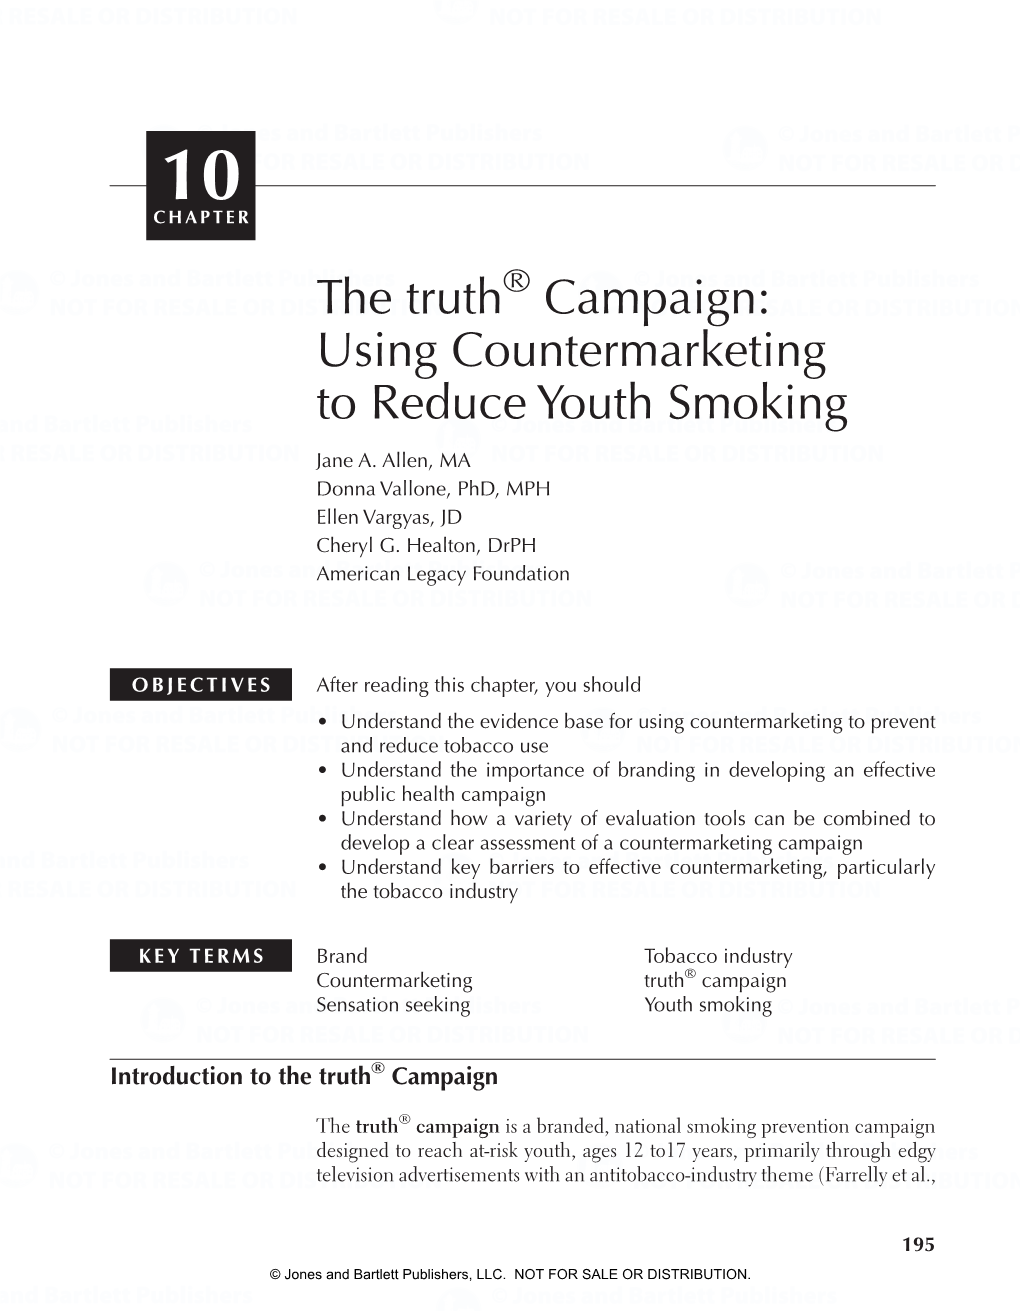 The Truth Campaign: Using Countermarketing to Reduce Youth